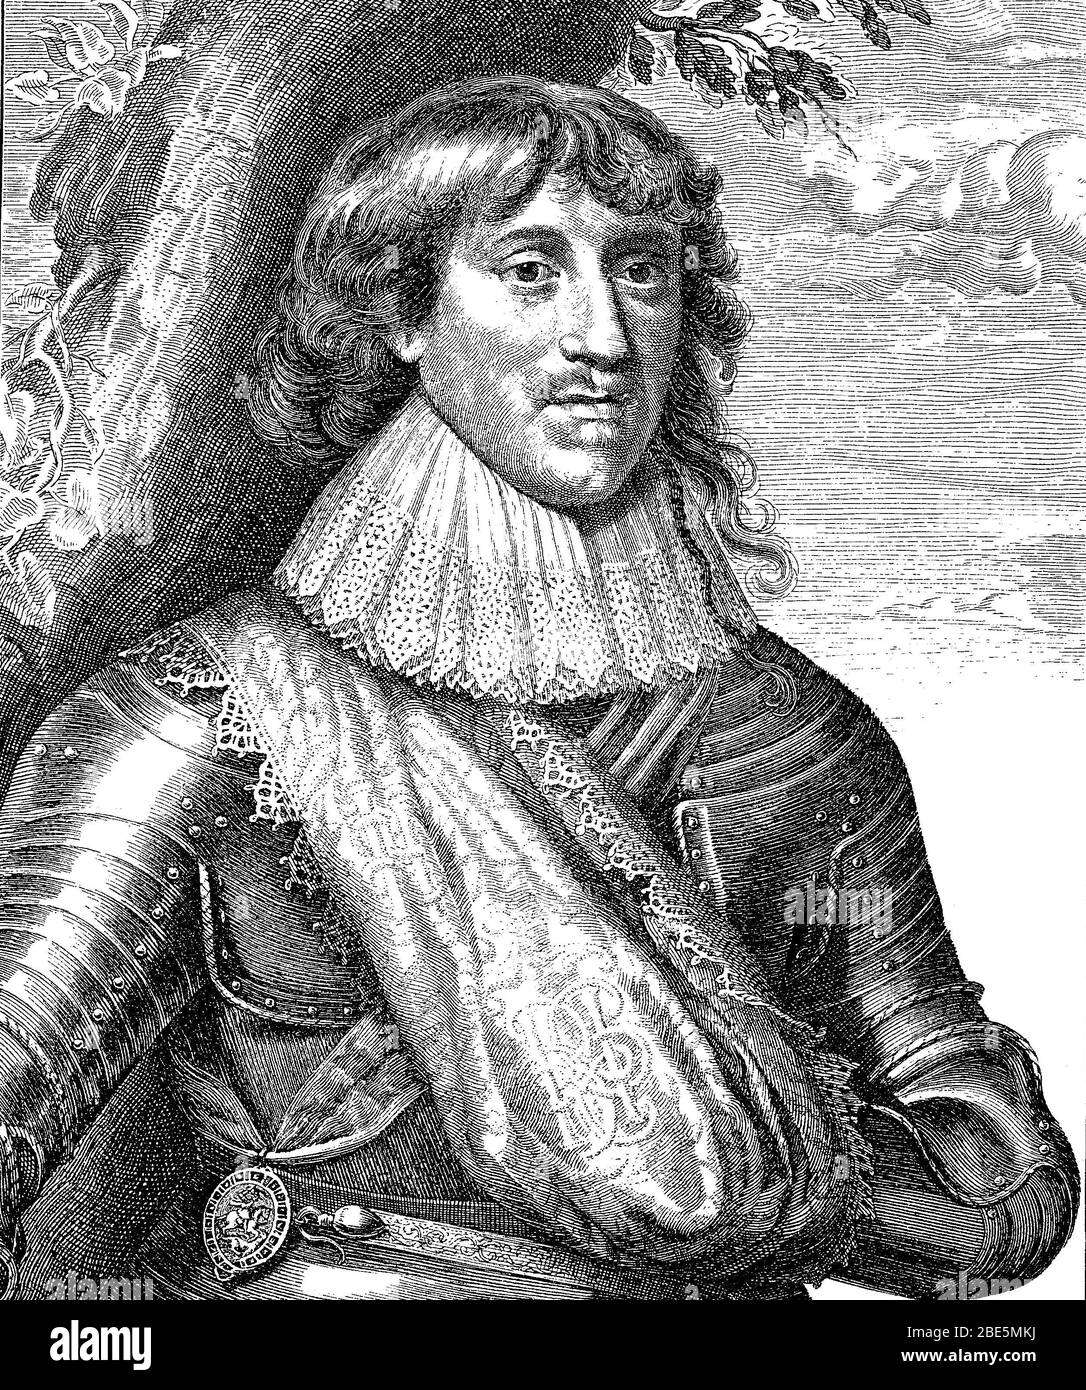 Christian von Braunschweig-Wolfenbüttel, 20 September 1599 - 16 June 1626, nominally Duke of Braunschweig and Lüneburg and Administrator of the Diocese of Halberstadt, also Christian the Younger, the Awesome Christian, is one of the most famous commanders of the Guelphs in the struggle against the House of Habsburg and the Catholic League in the Thirty Years' War  /  Christian von Braunschweig-Wolfenbüttel, 20. September 1599 - 16. Juni 1626, nominell Herzog von Braunschweig und Lüneburg und Administrator des Bistums Halberstadt, auch Christian der Jüngere, der Tolle Christian, zählt zu den be Stock Photo